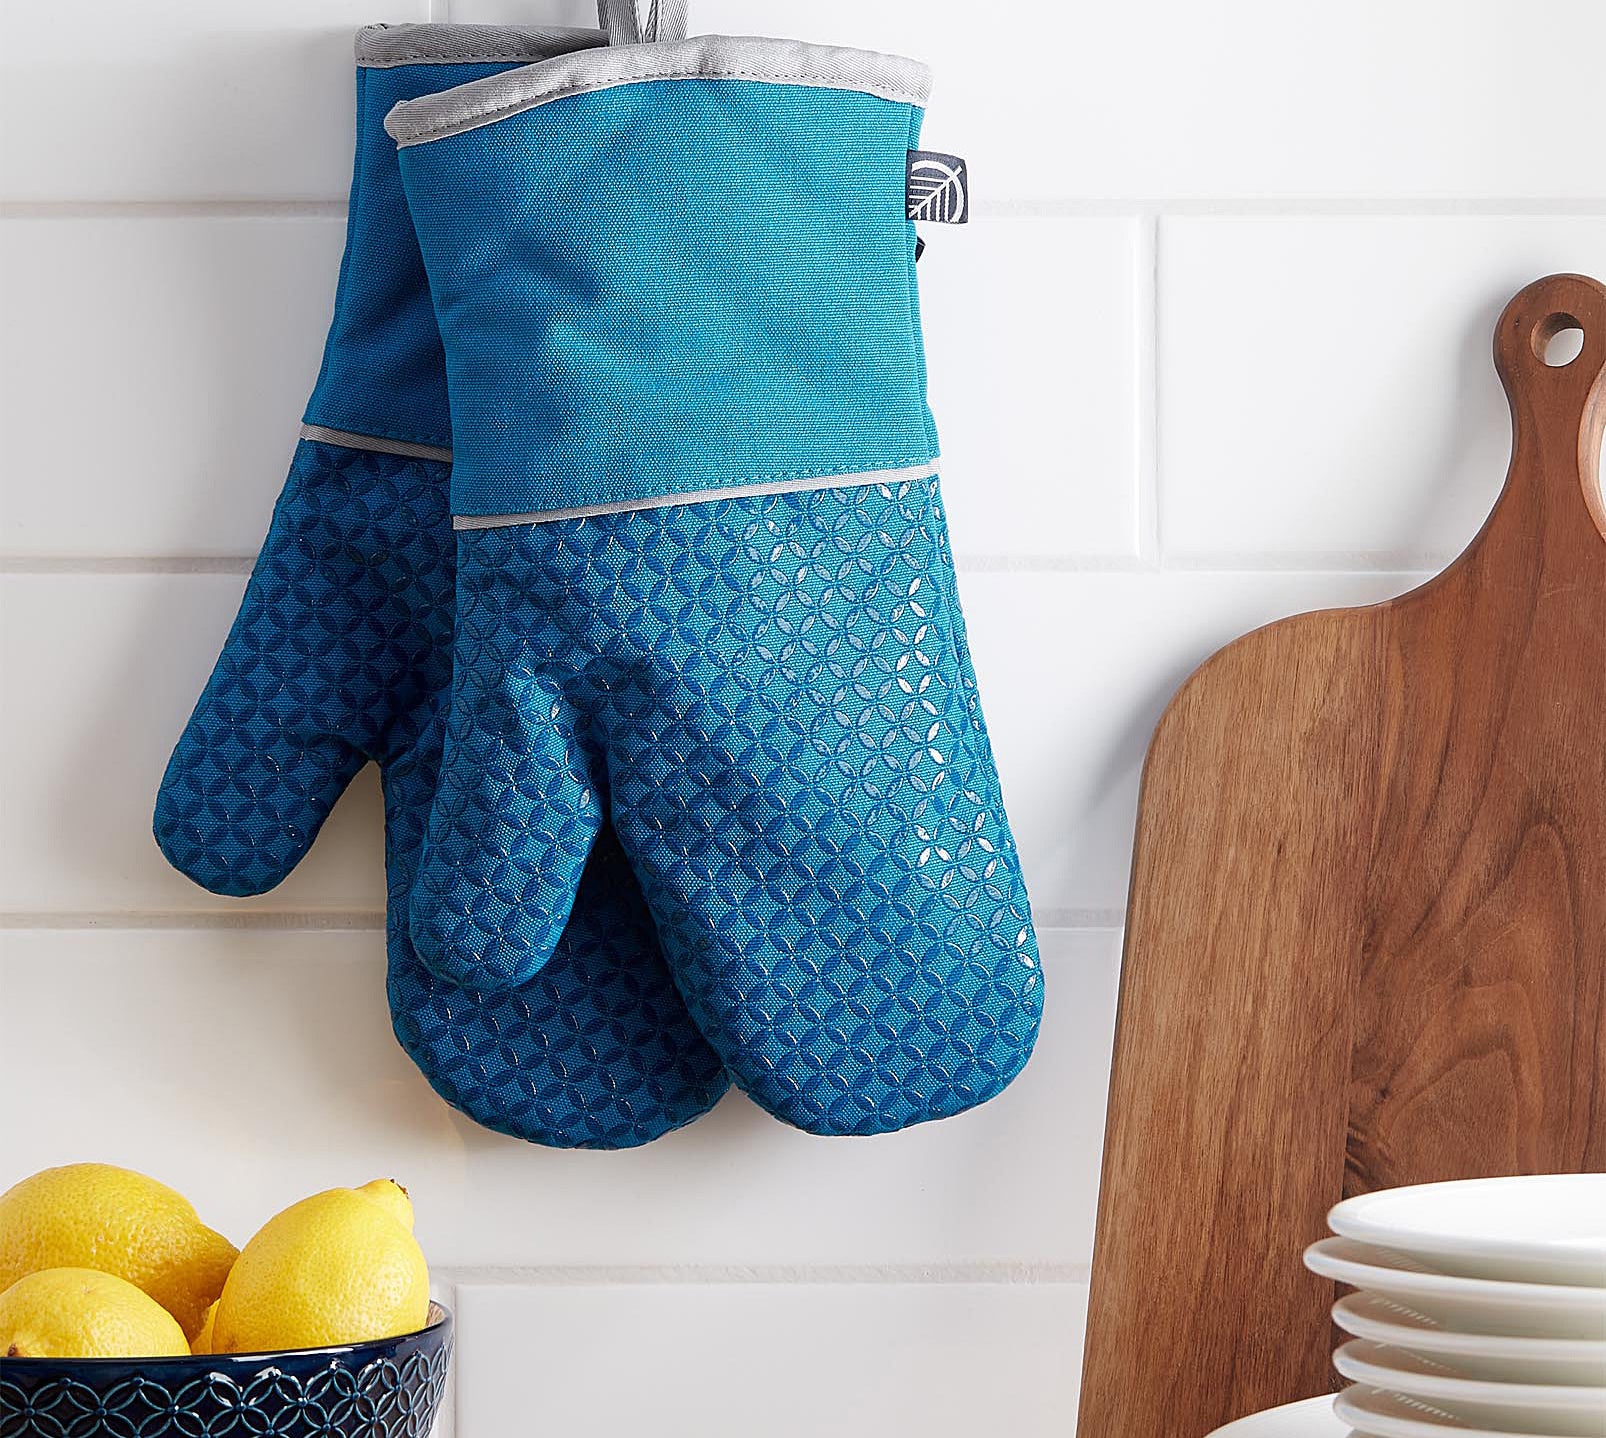 A pair of oven mitts hanging from the wall